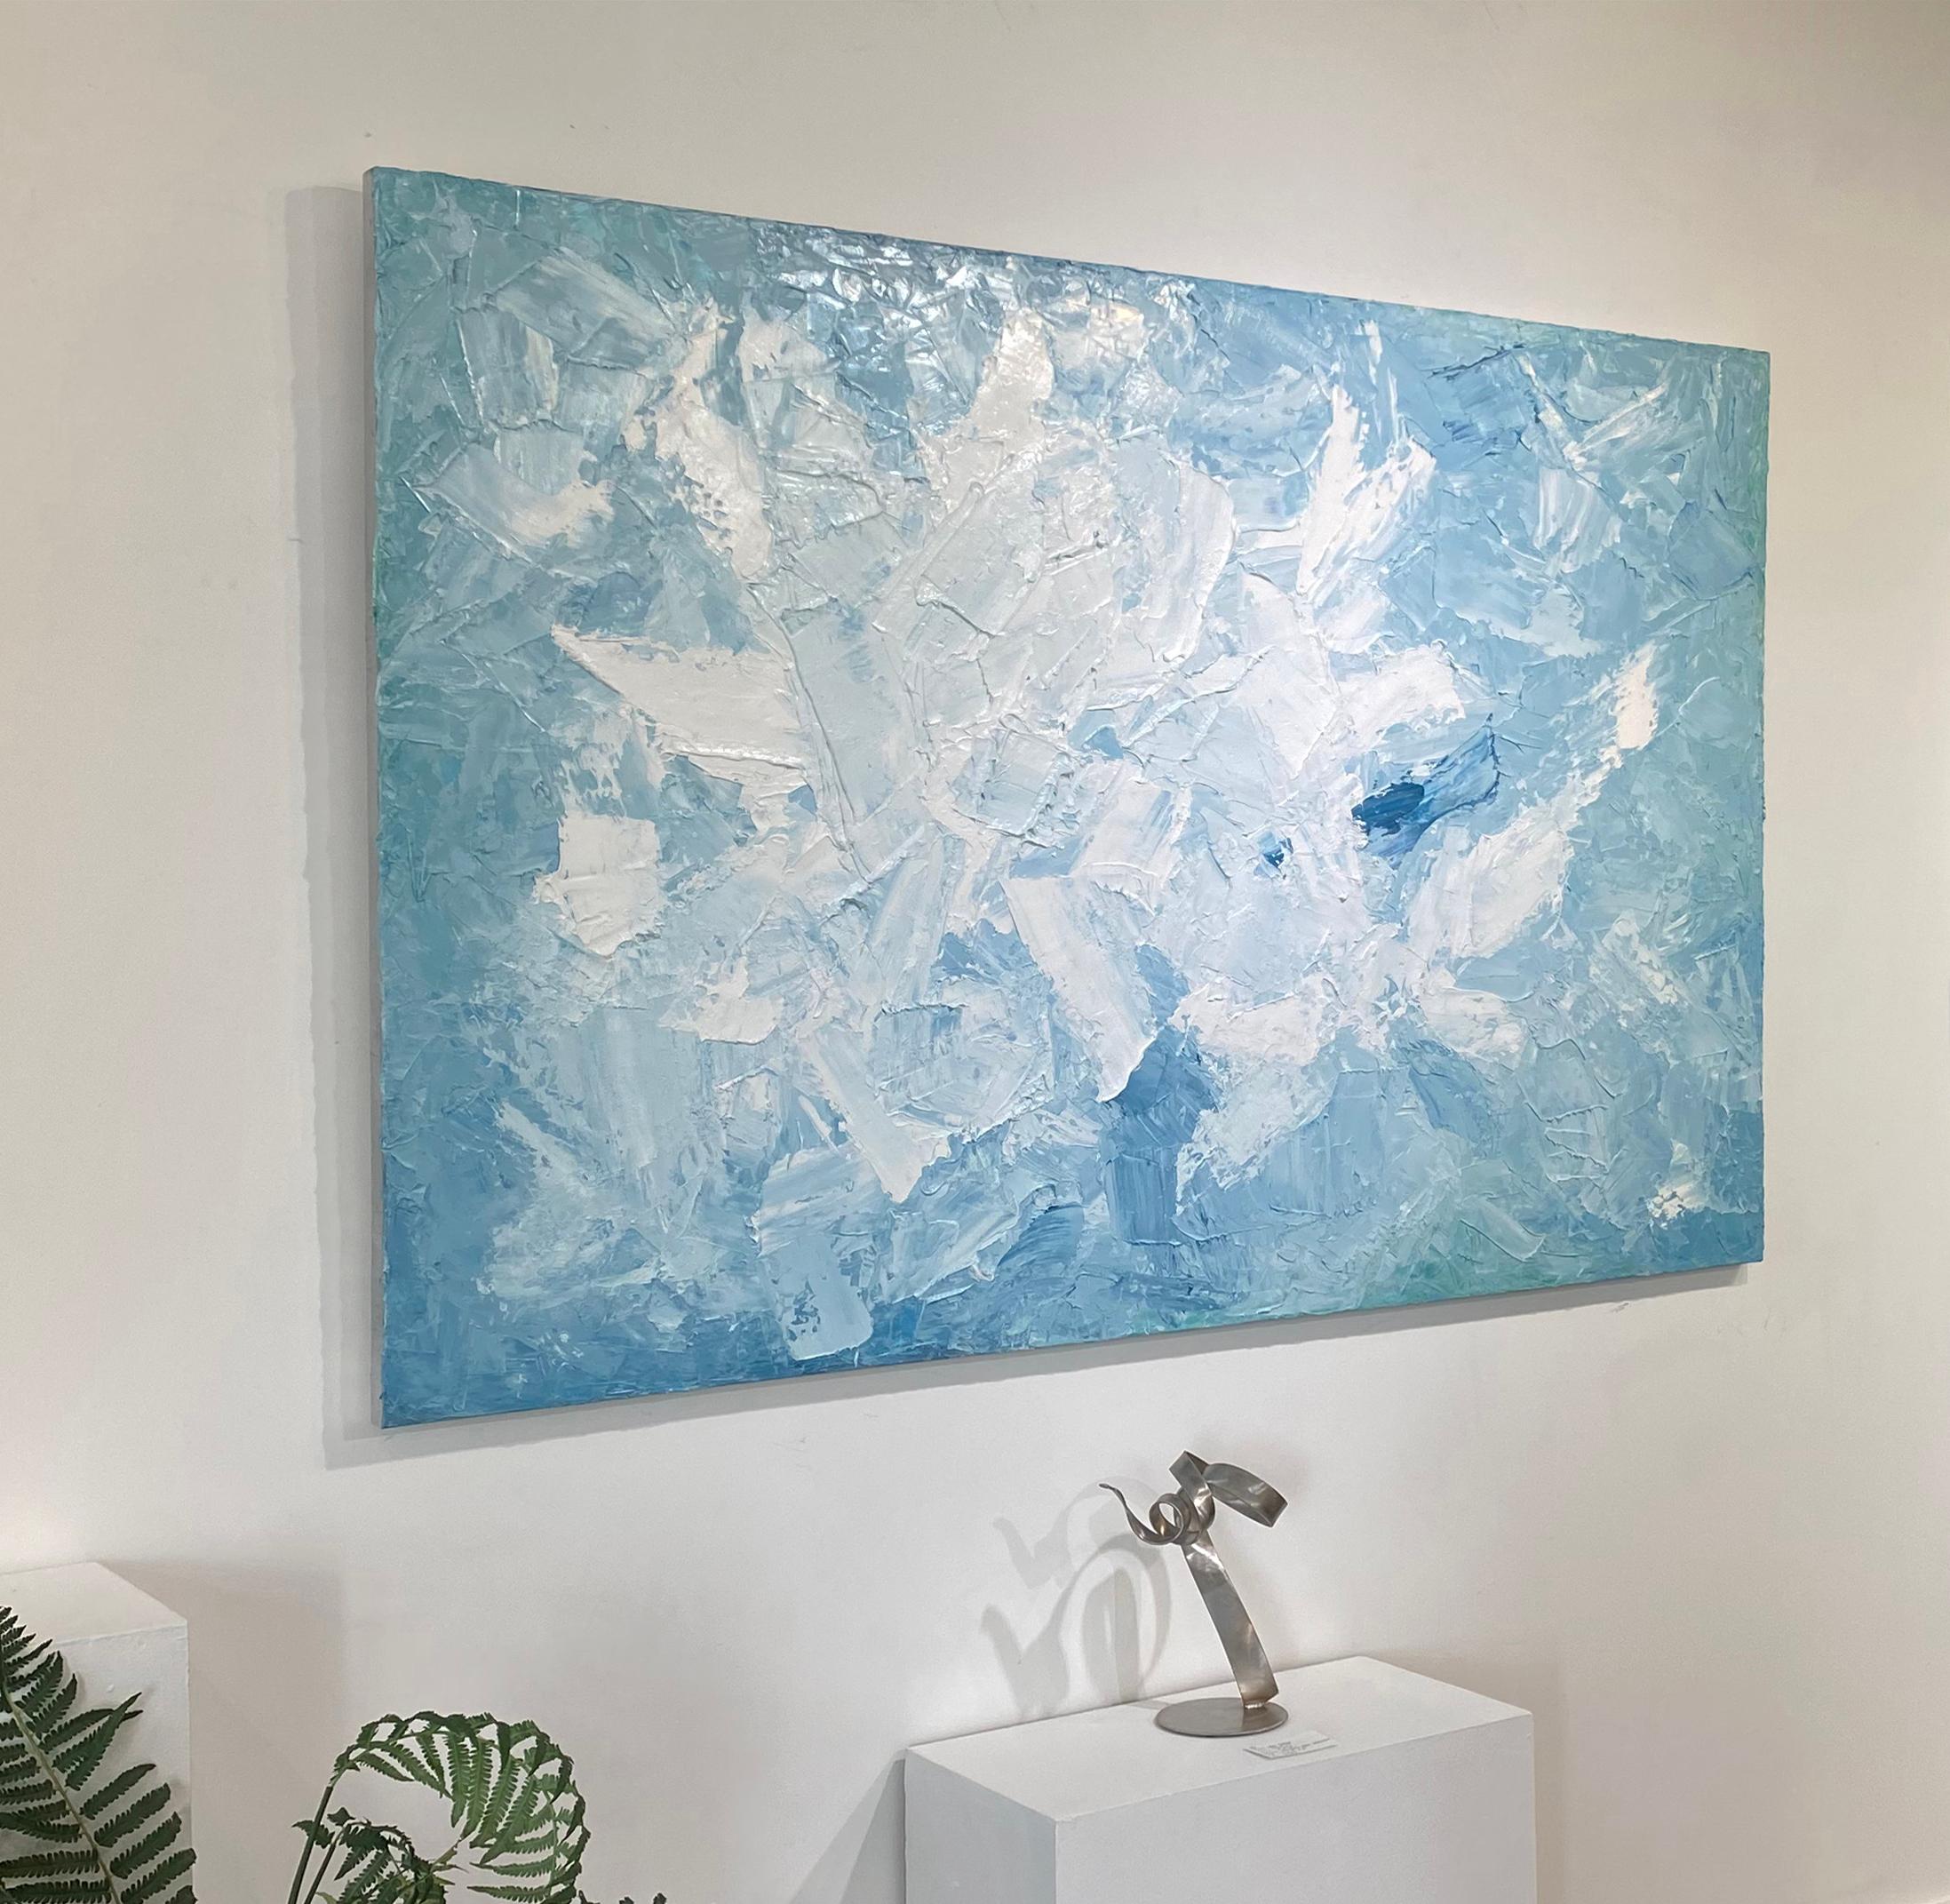 This large-scale, abstract statement painting is made with oil paint on gallery wrapped canvas. Thick strokes of white paint are layered on top of sky blue and muted teal under layers. Spots of pure blue can be found sporadically throughout the